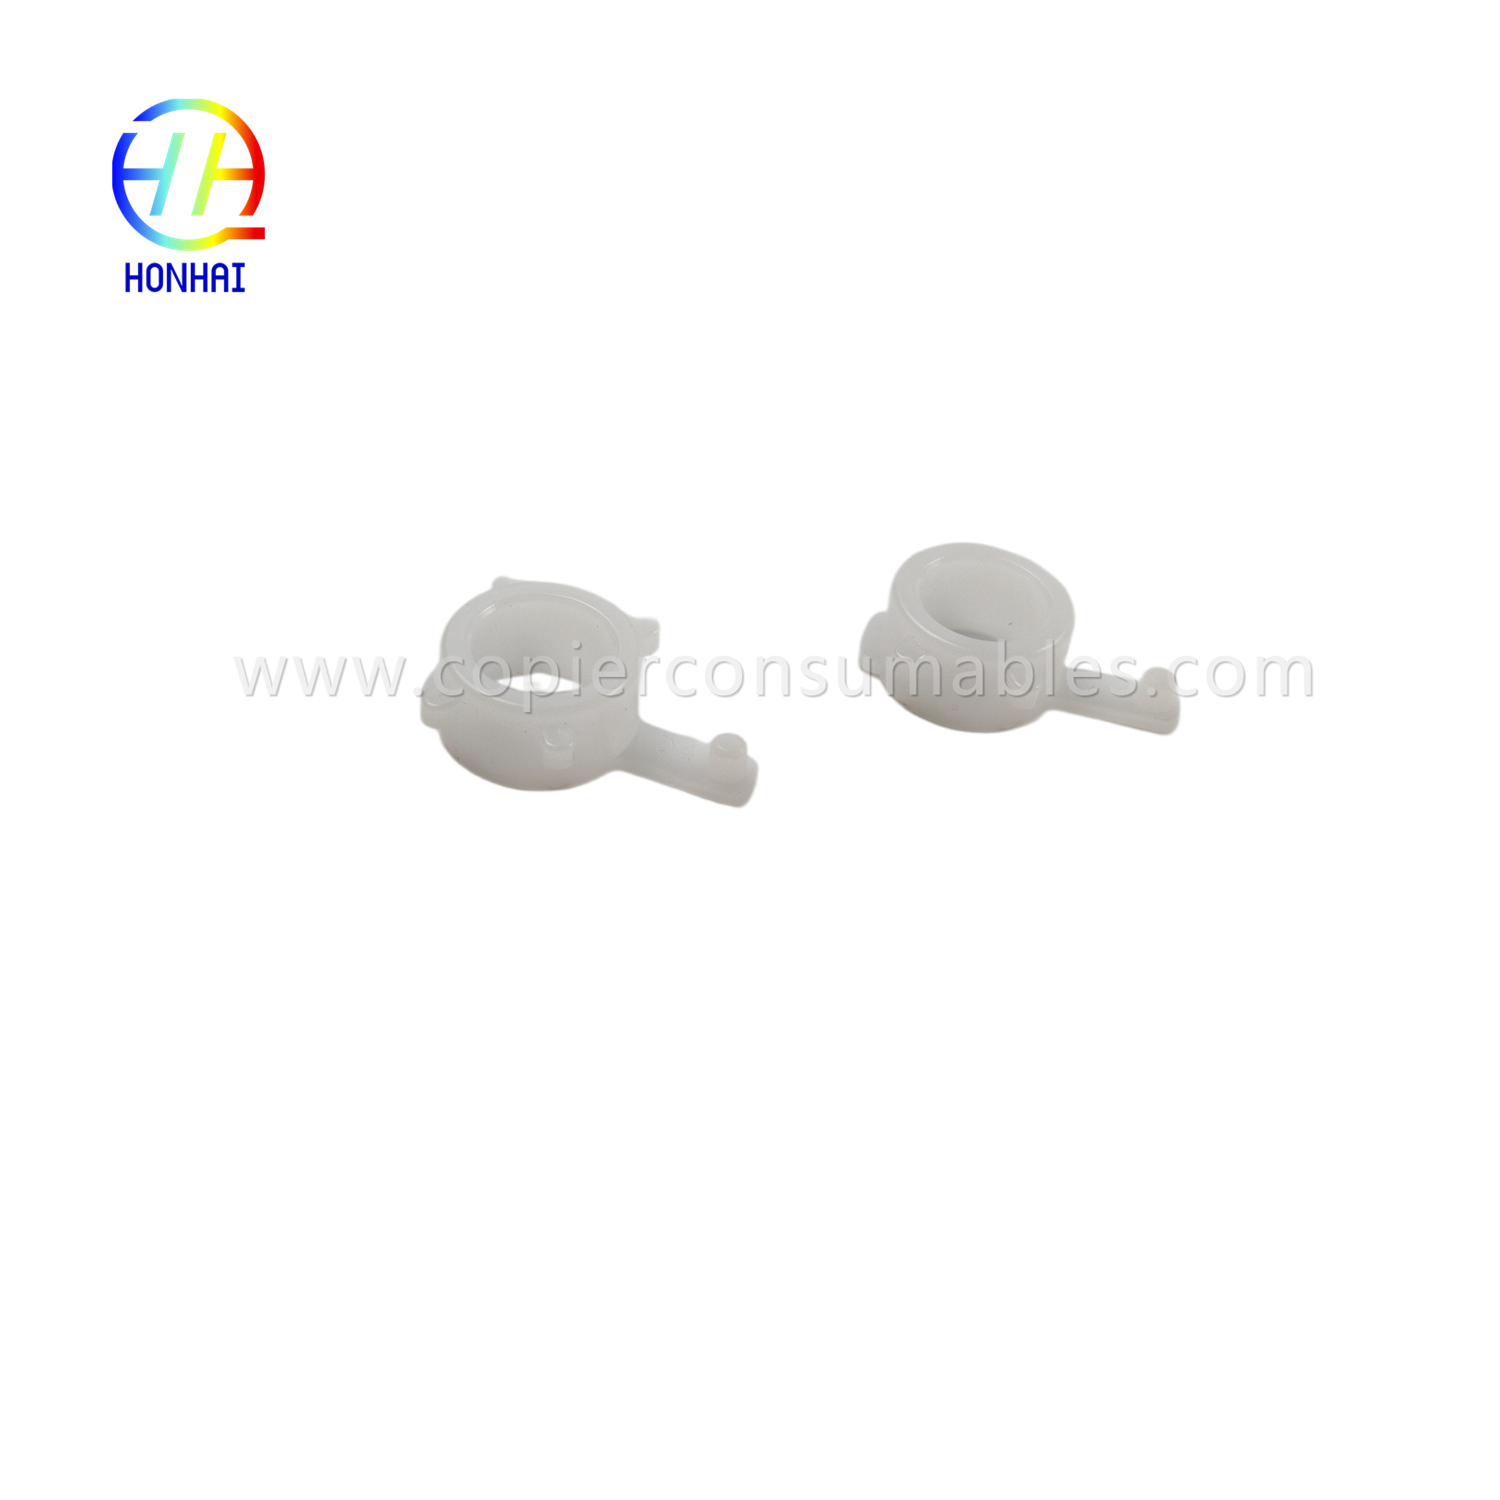 https://c585.goodao.net/delivery-roller-tuleje-for-hp-2035-2055-2015-1320-rc2-6237-000-rl2-6229-oem-product/